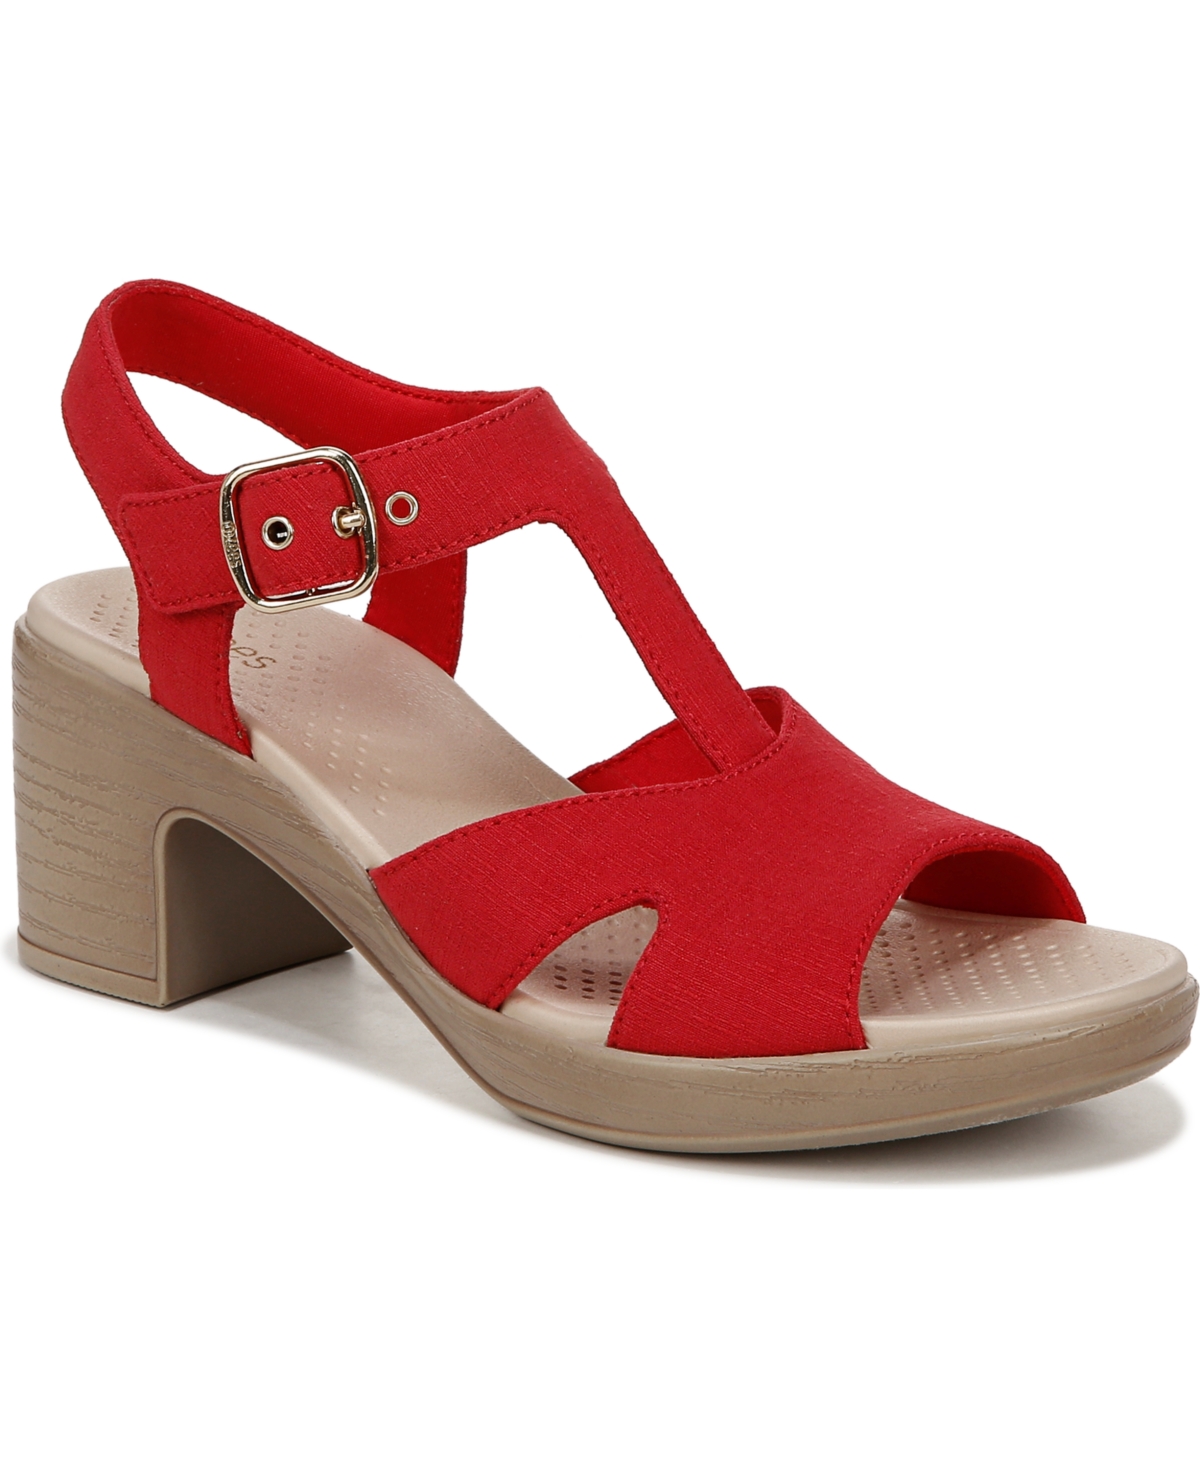 BZees Everly Washable Strappy Sandals - Fire Red Denim Fabric